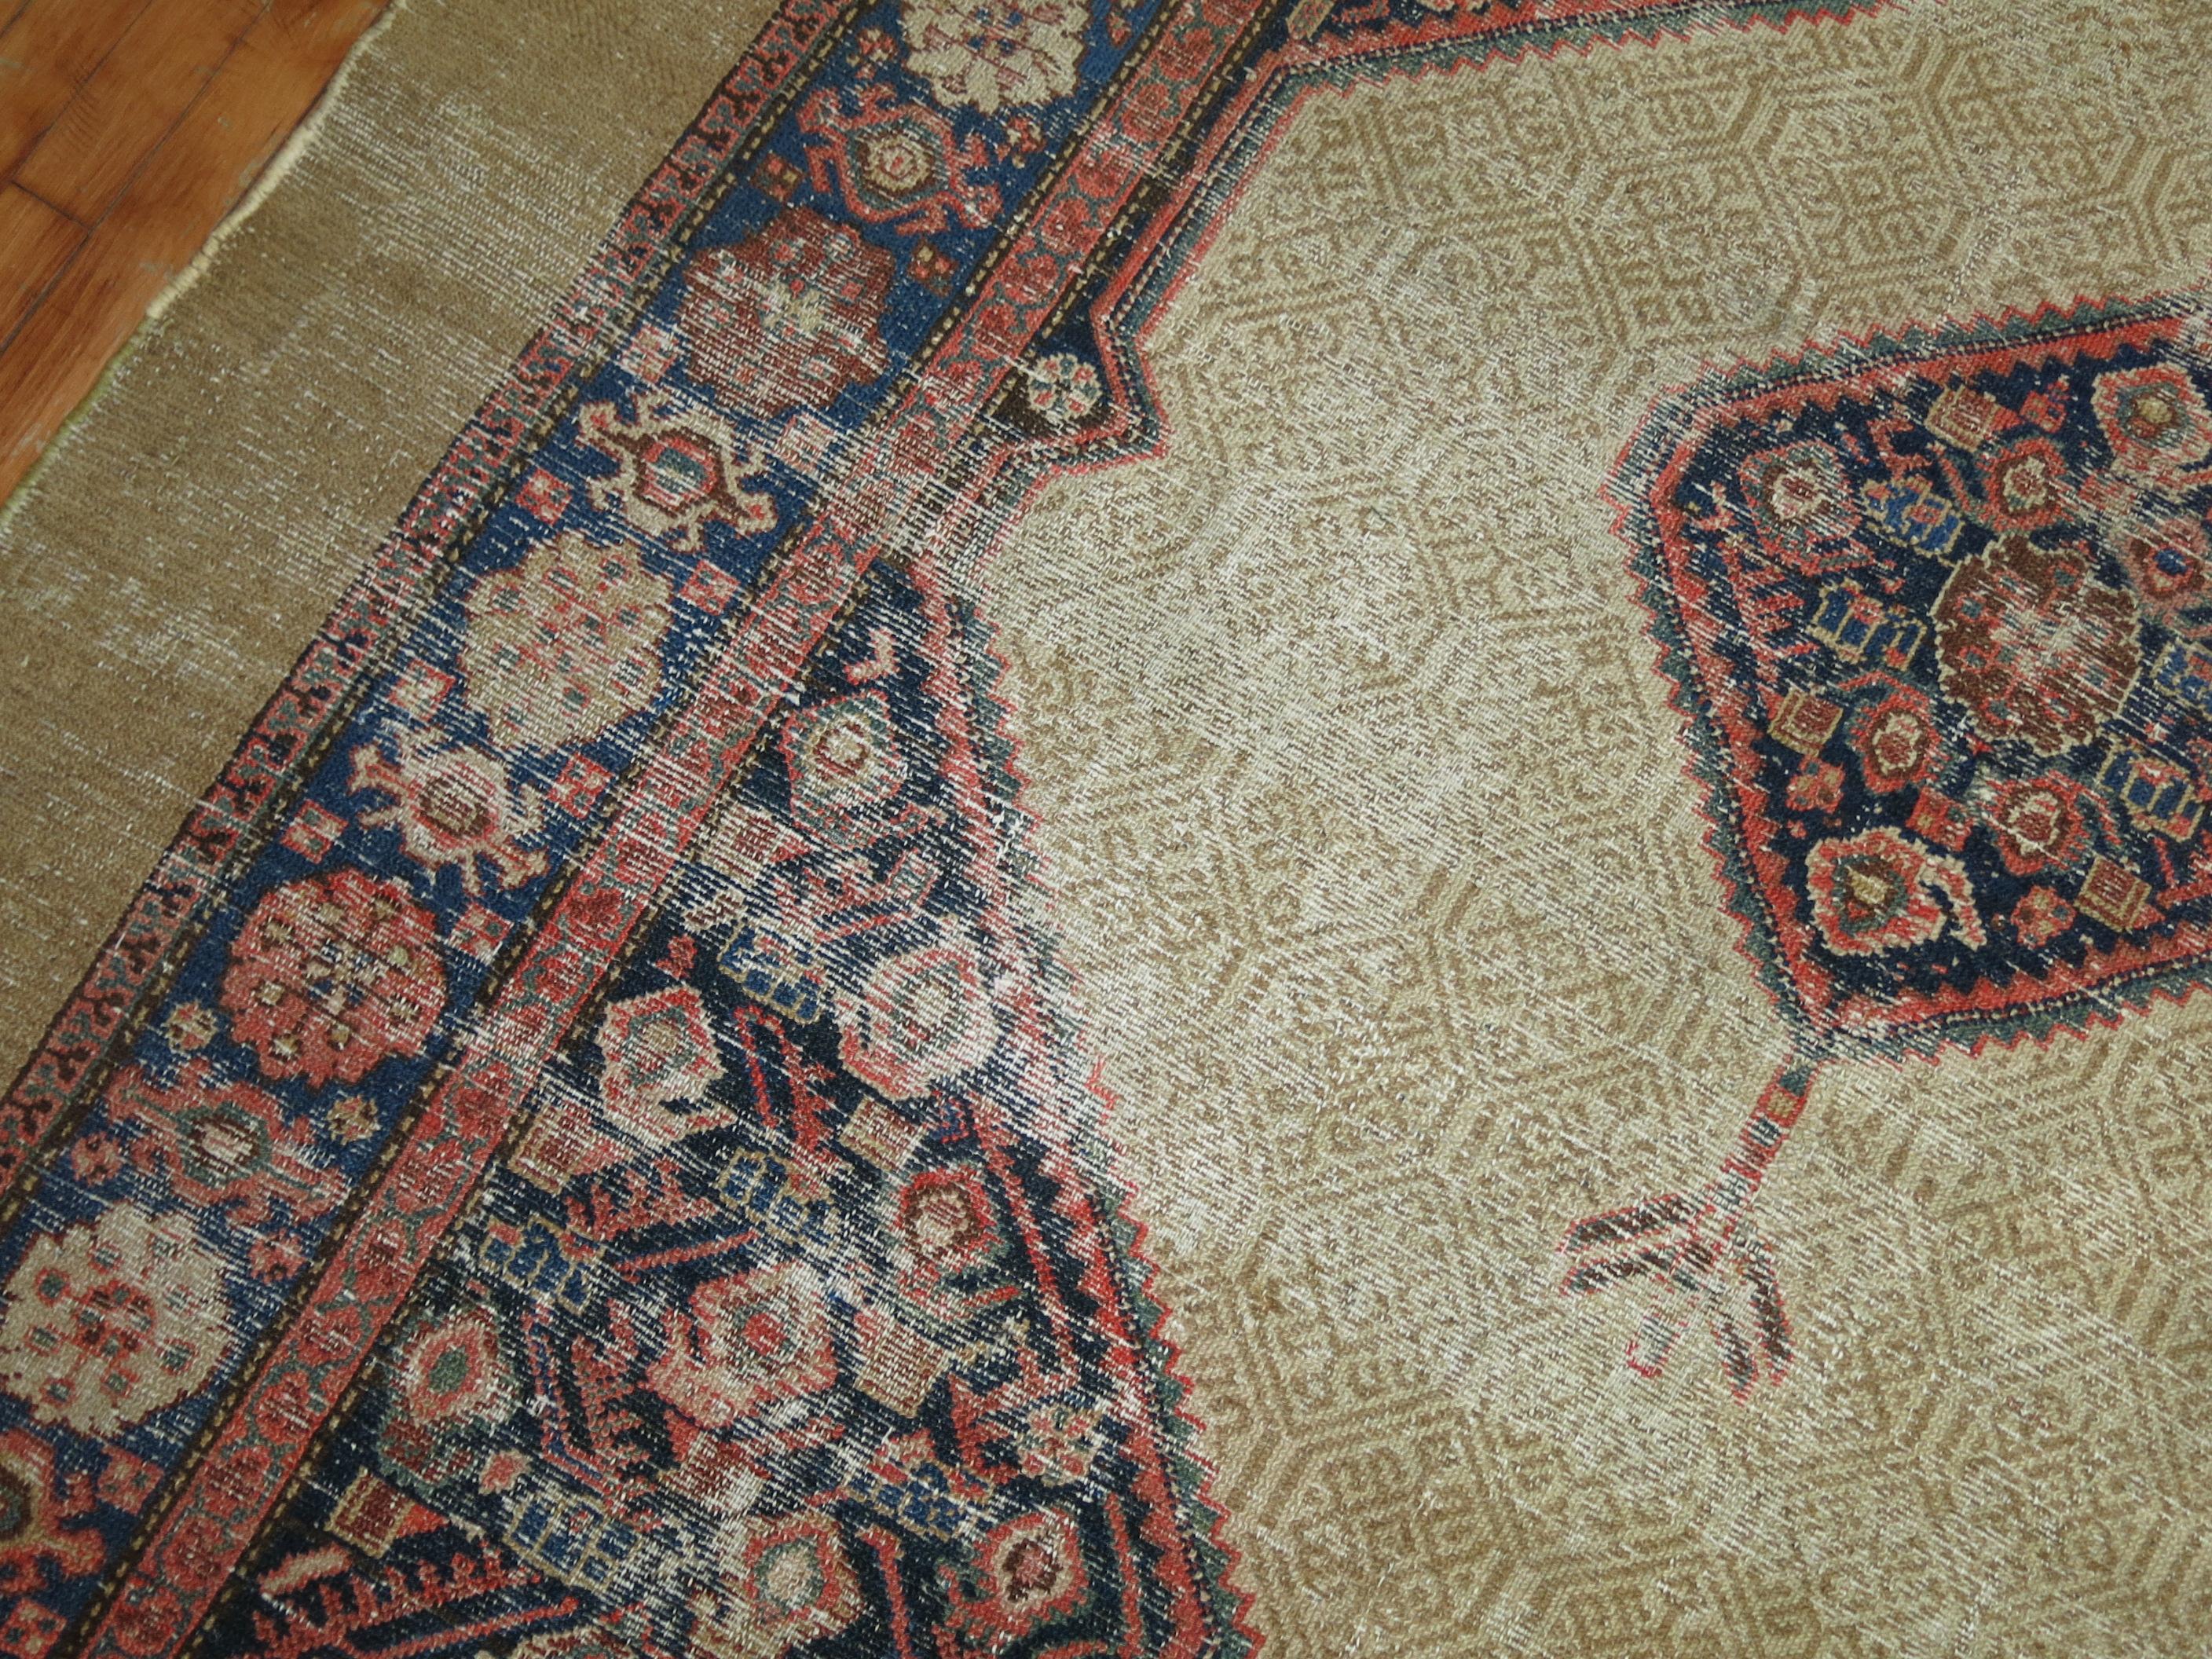 Worn Tribal Persian Serab Gallery Runner In Good Condition For Sale In New York, NY